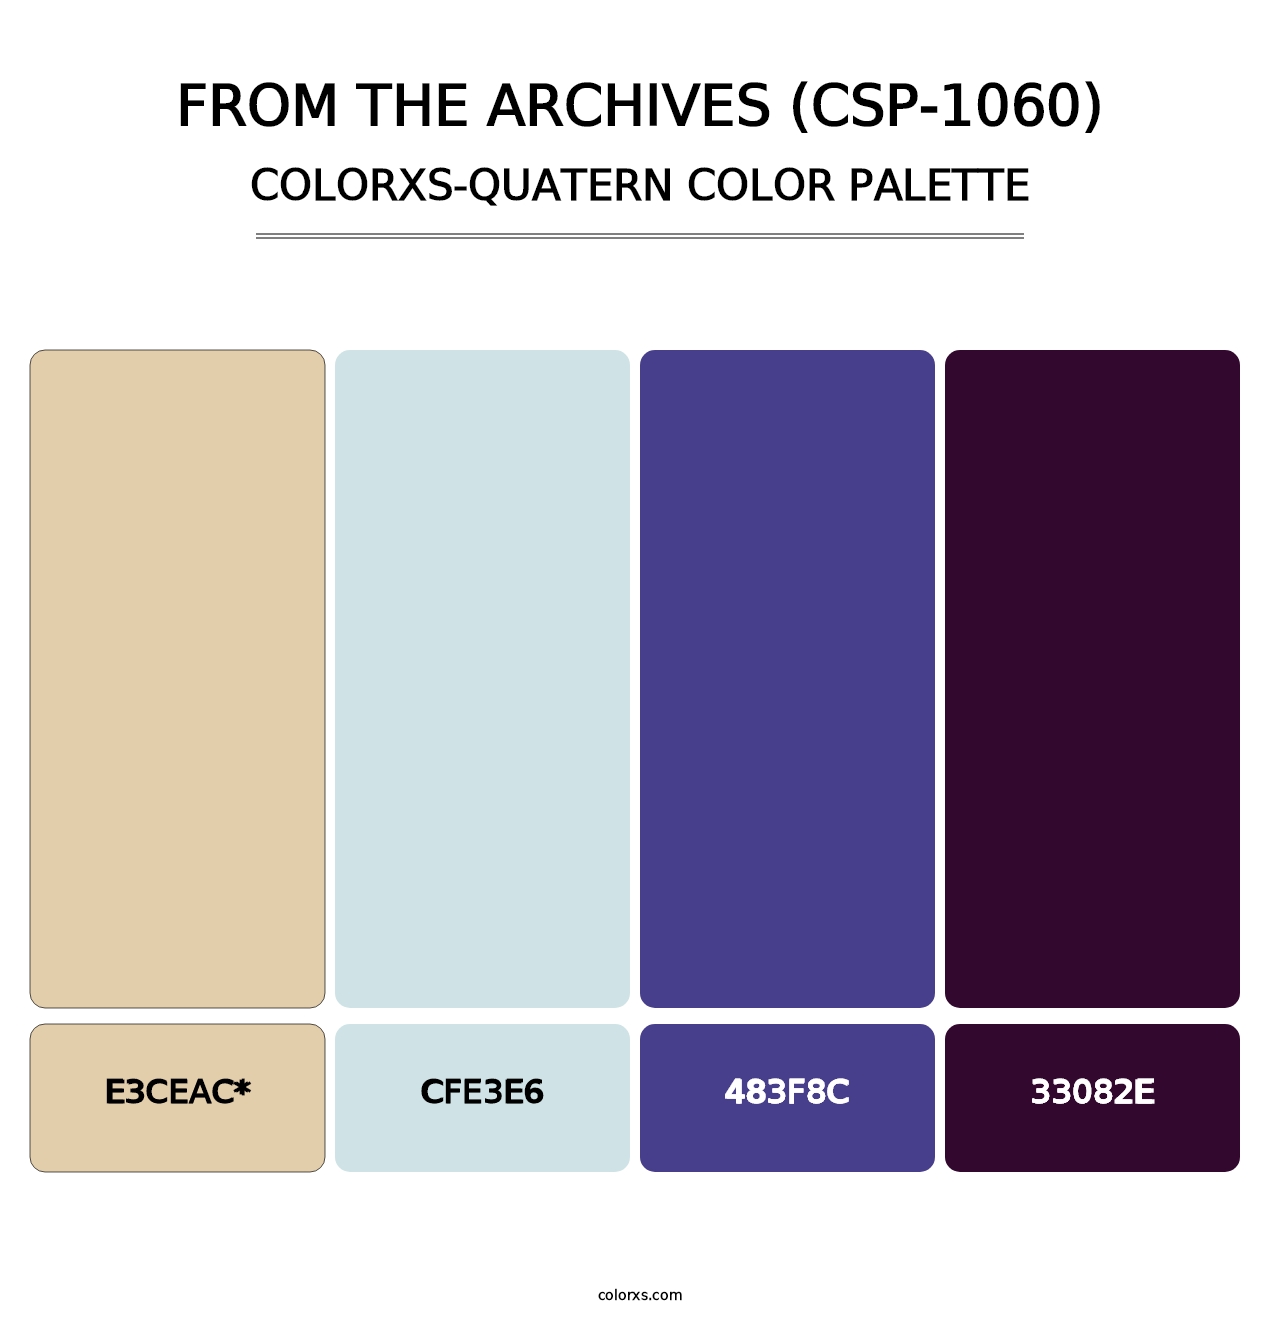 From the Archives (CSP-1060) - Colorxs Quatern Palette